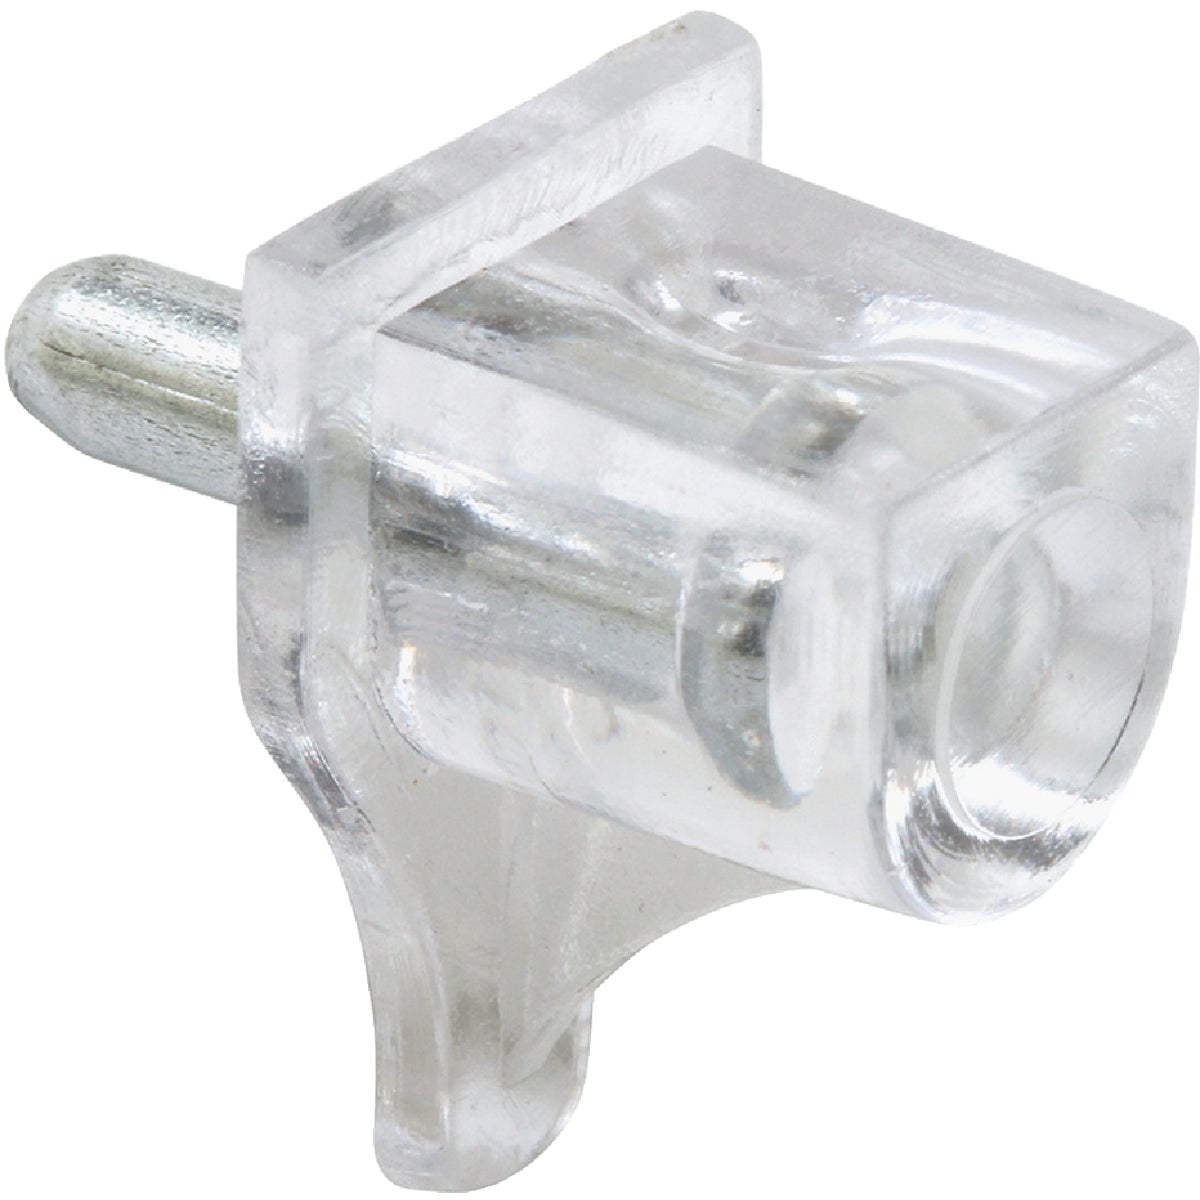 Item 208132, Metal support stem is 3/16 In. diameter. Color: Clear with metal stem.